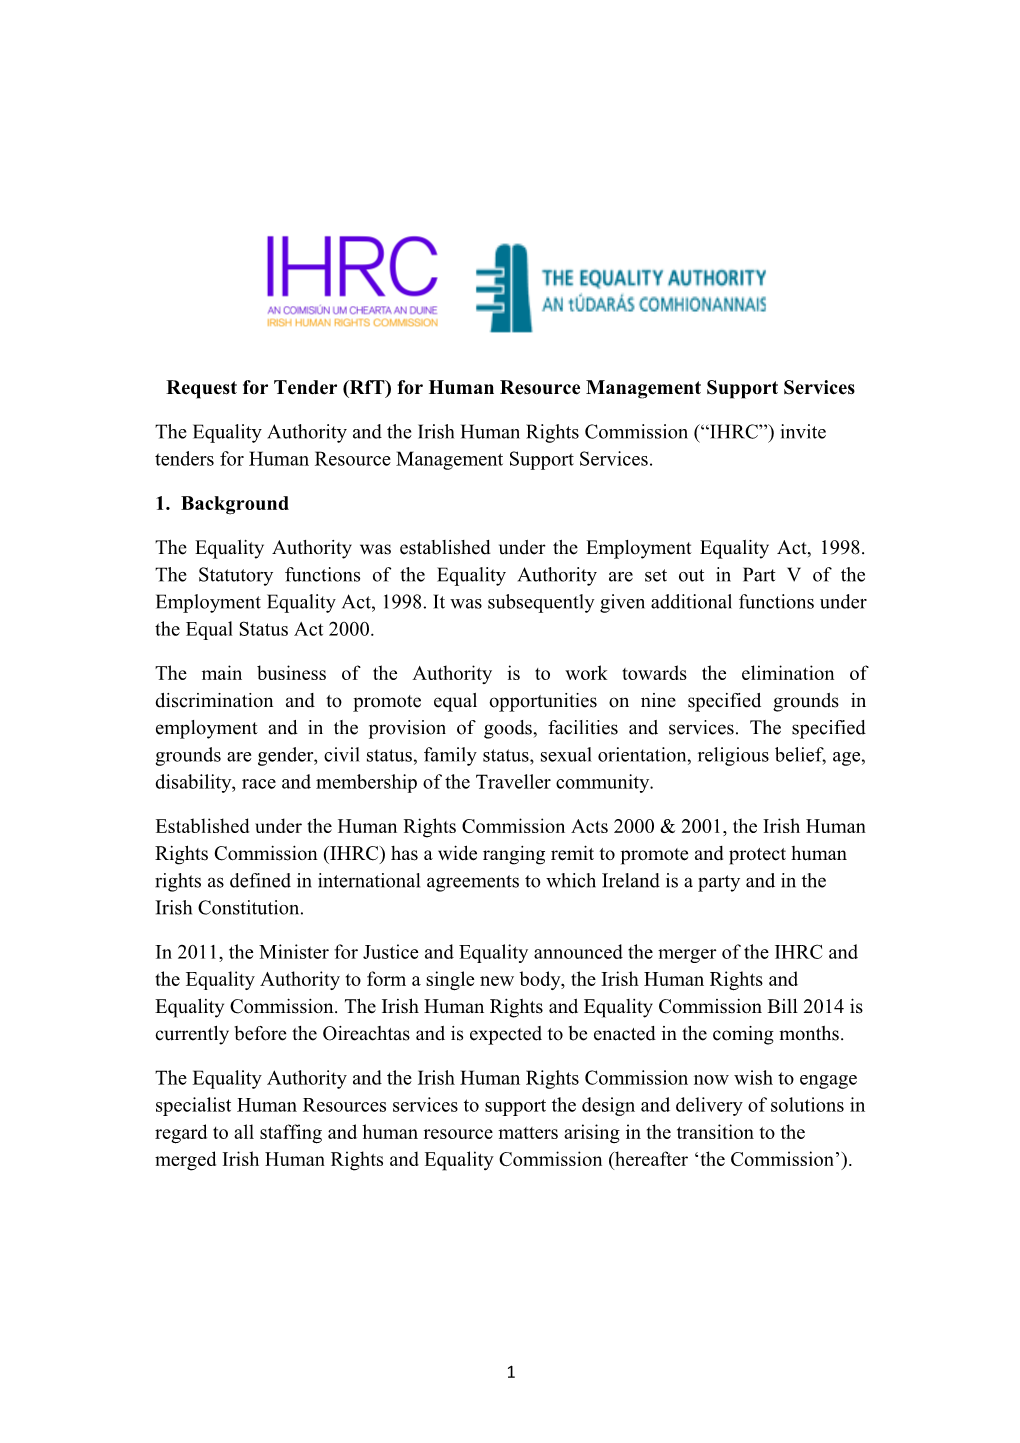 Request for Tender (Rft) for Human Resource Management Supportservices